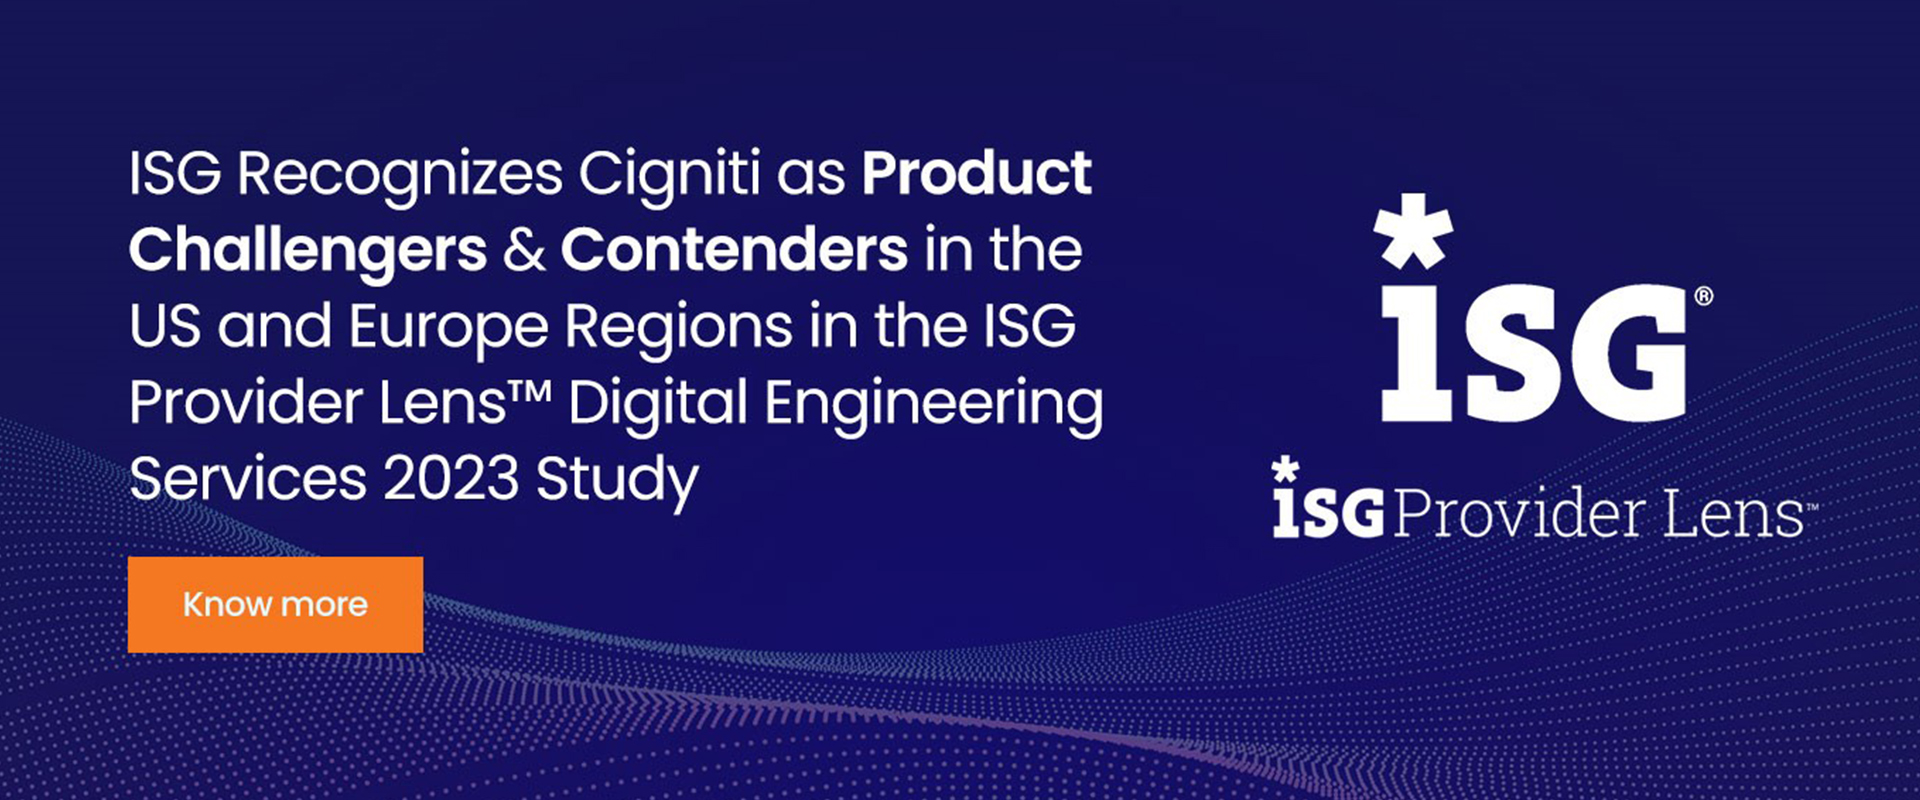 ISG Recognizes Cigniti in the ISG Provider Lens Study Digital Engineering Services 2023